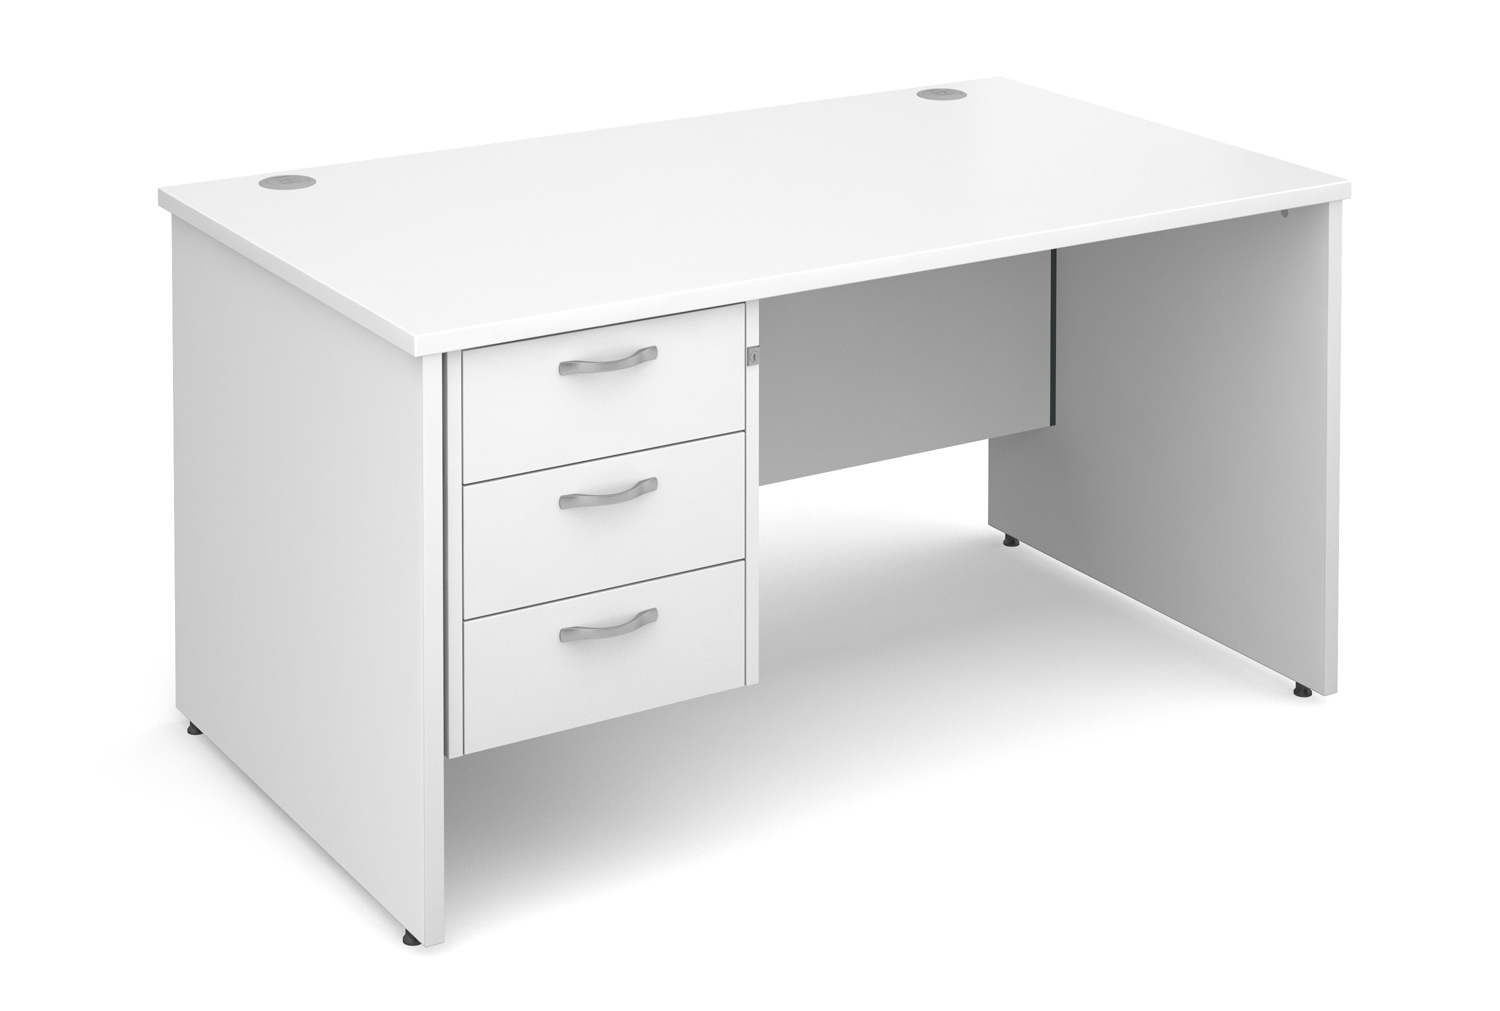 Value Line Deluxe Panel End Clerical Desk 3 Drawers